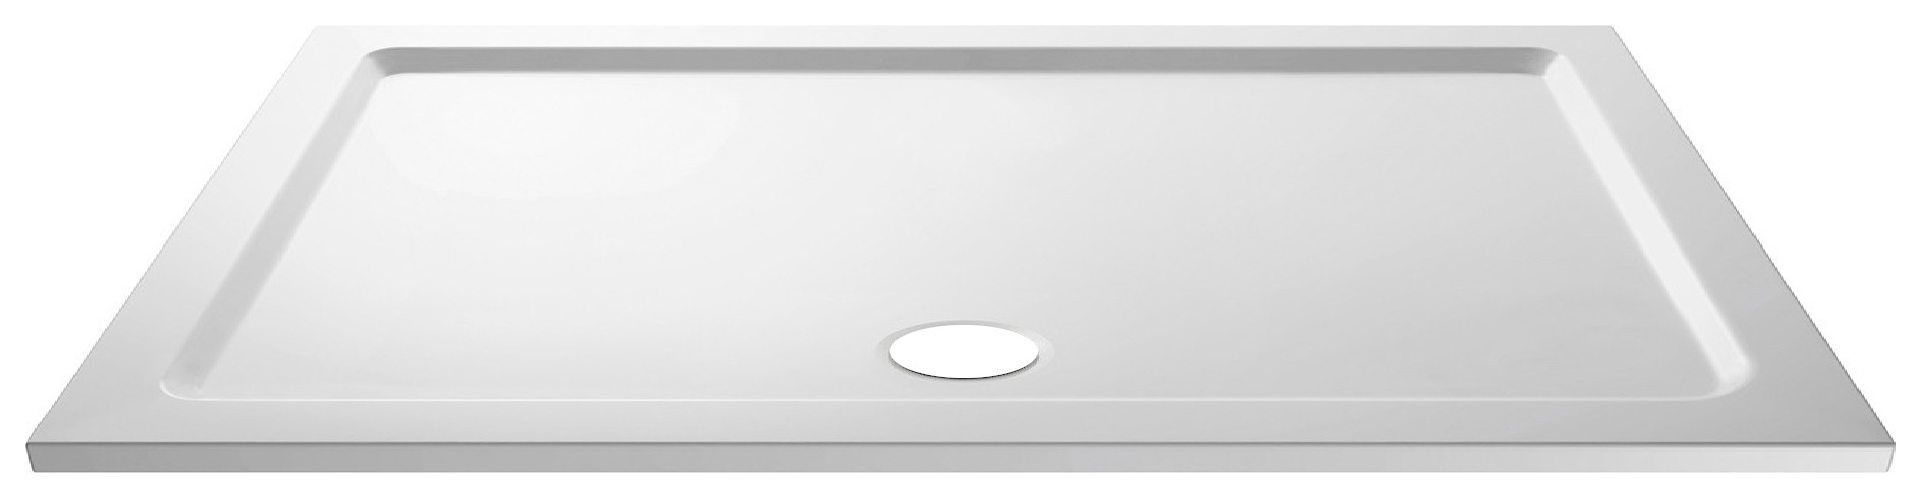 Image of Wickes 40mm Pearlstone Rectangular Shower Tray - 1400 x 900mm